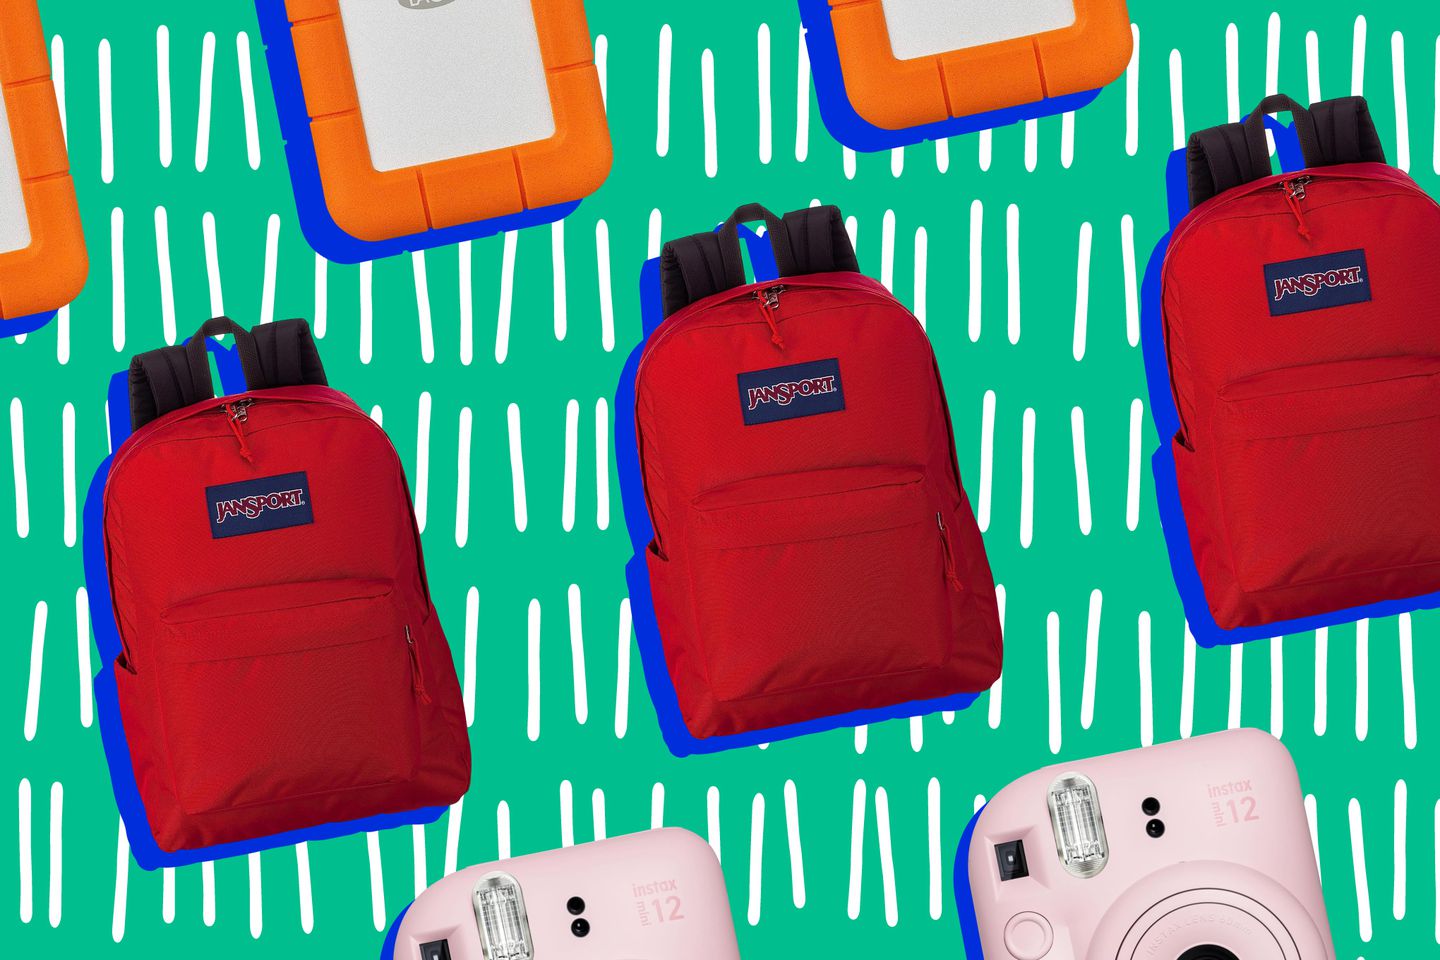 The 26 best back-to-school gifts: AirPods, Echo Show 5, Tile Pro - The ...